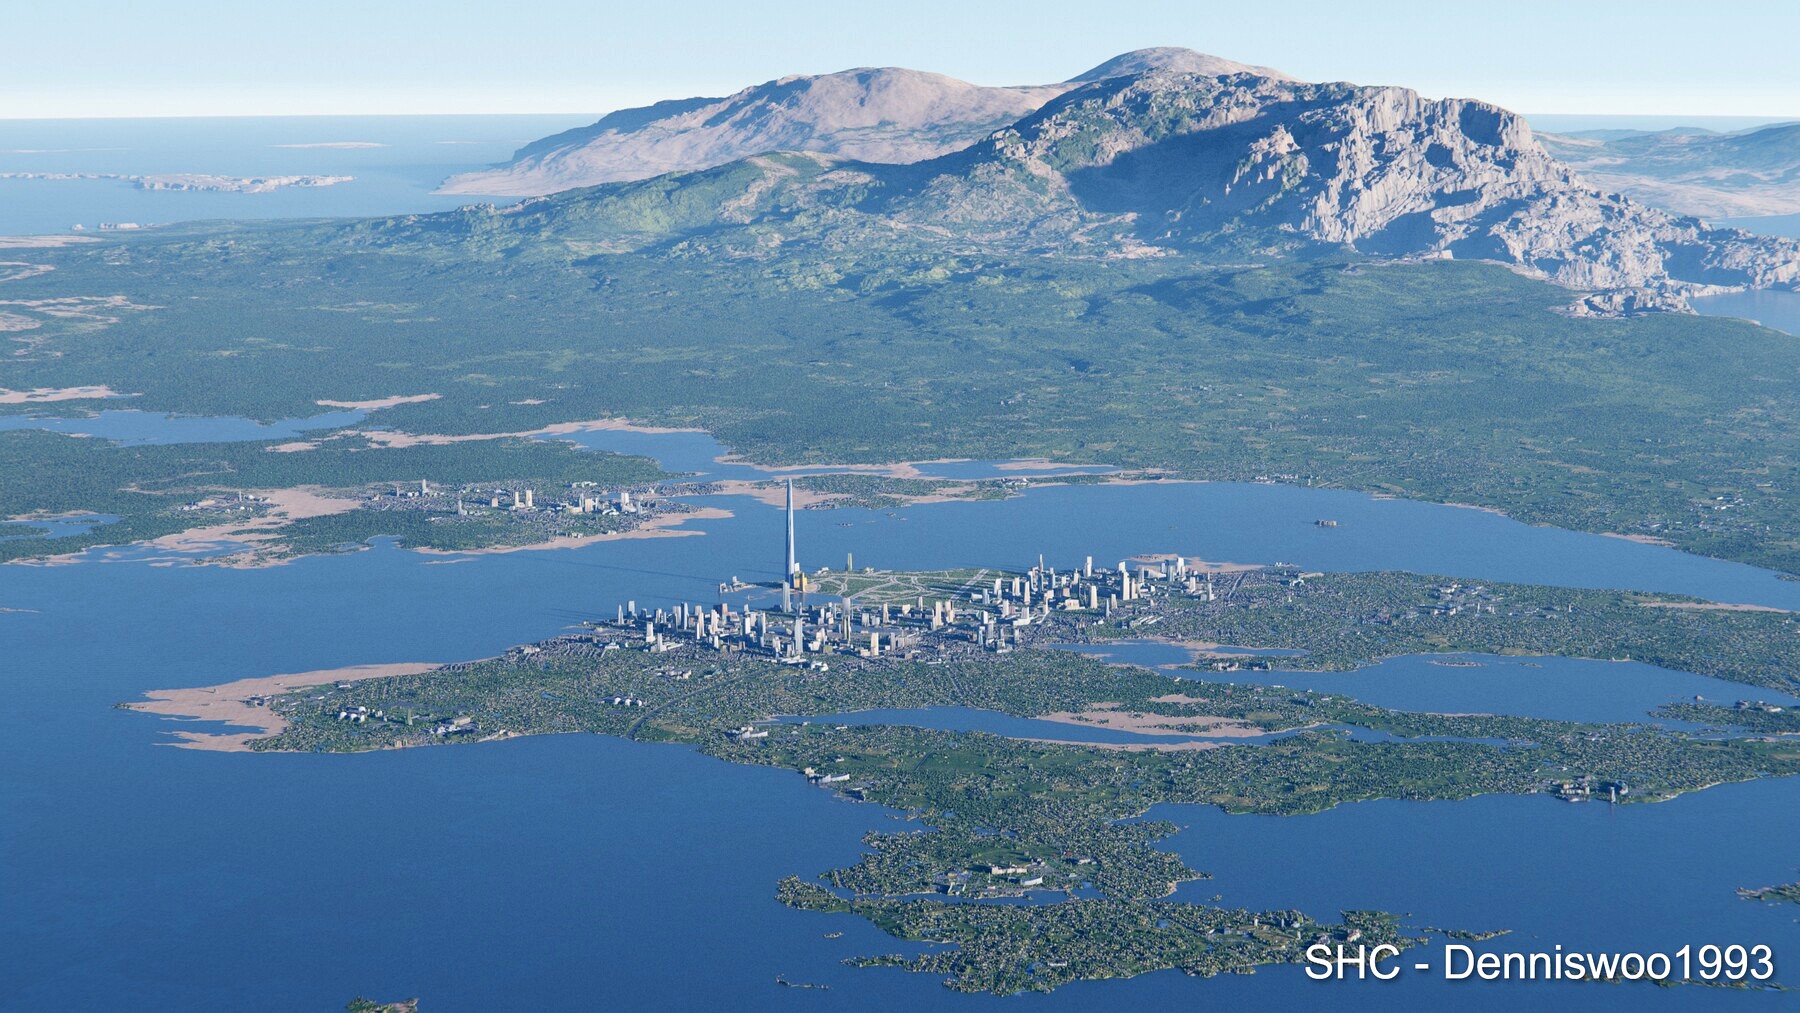 Large scale procedural terrain generator with 3D cities and vegetation